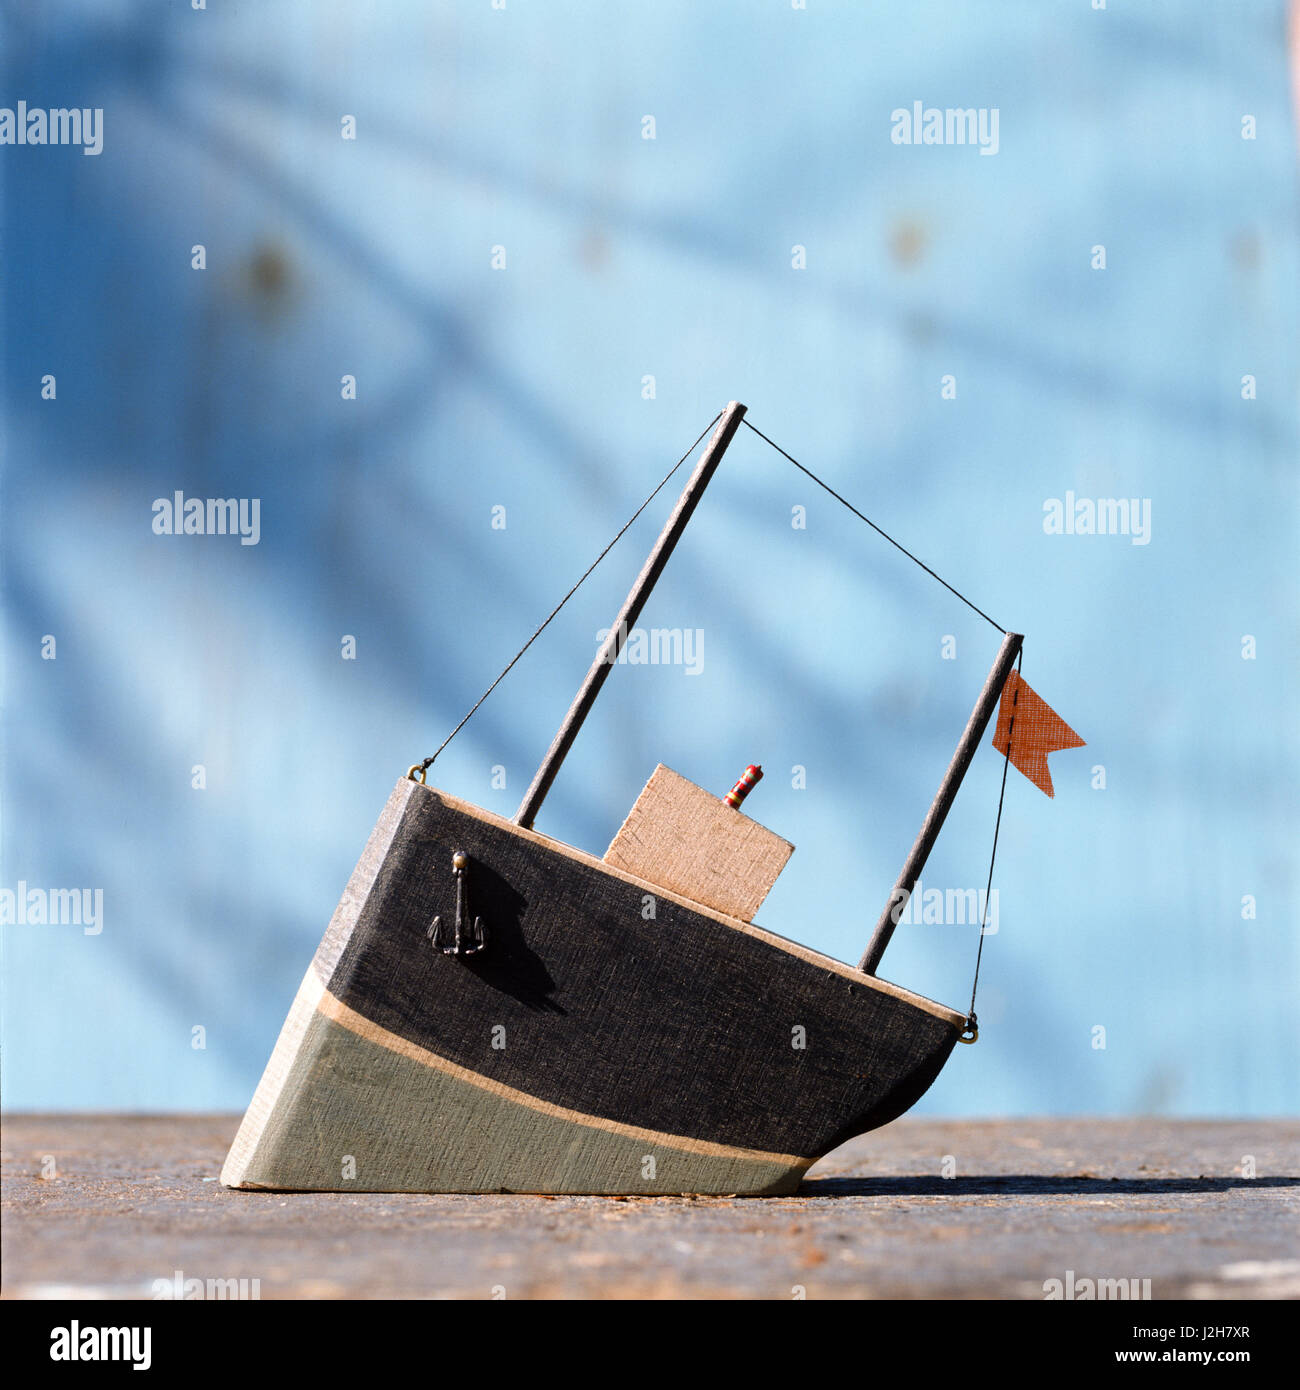 Model boat made of wood. Stock Photo